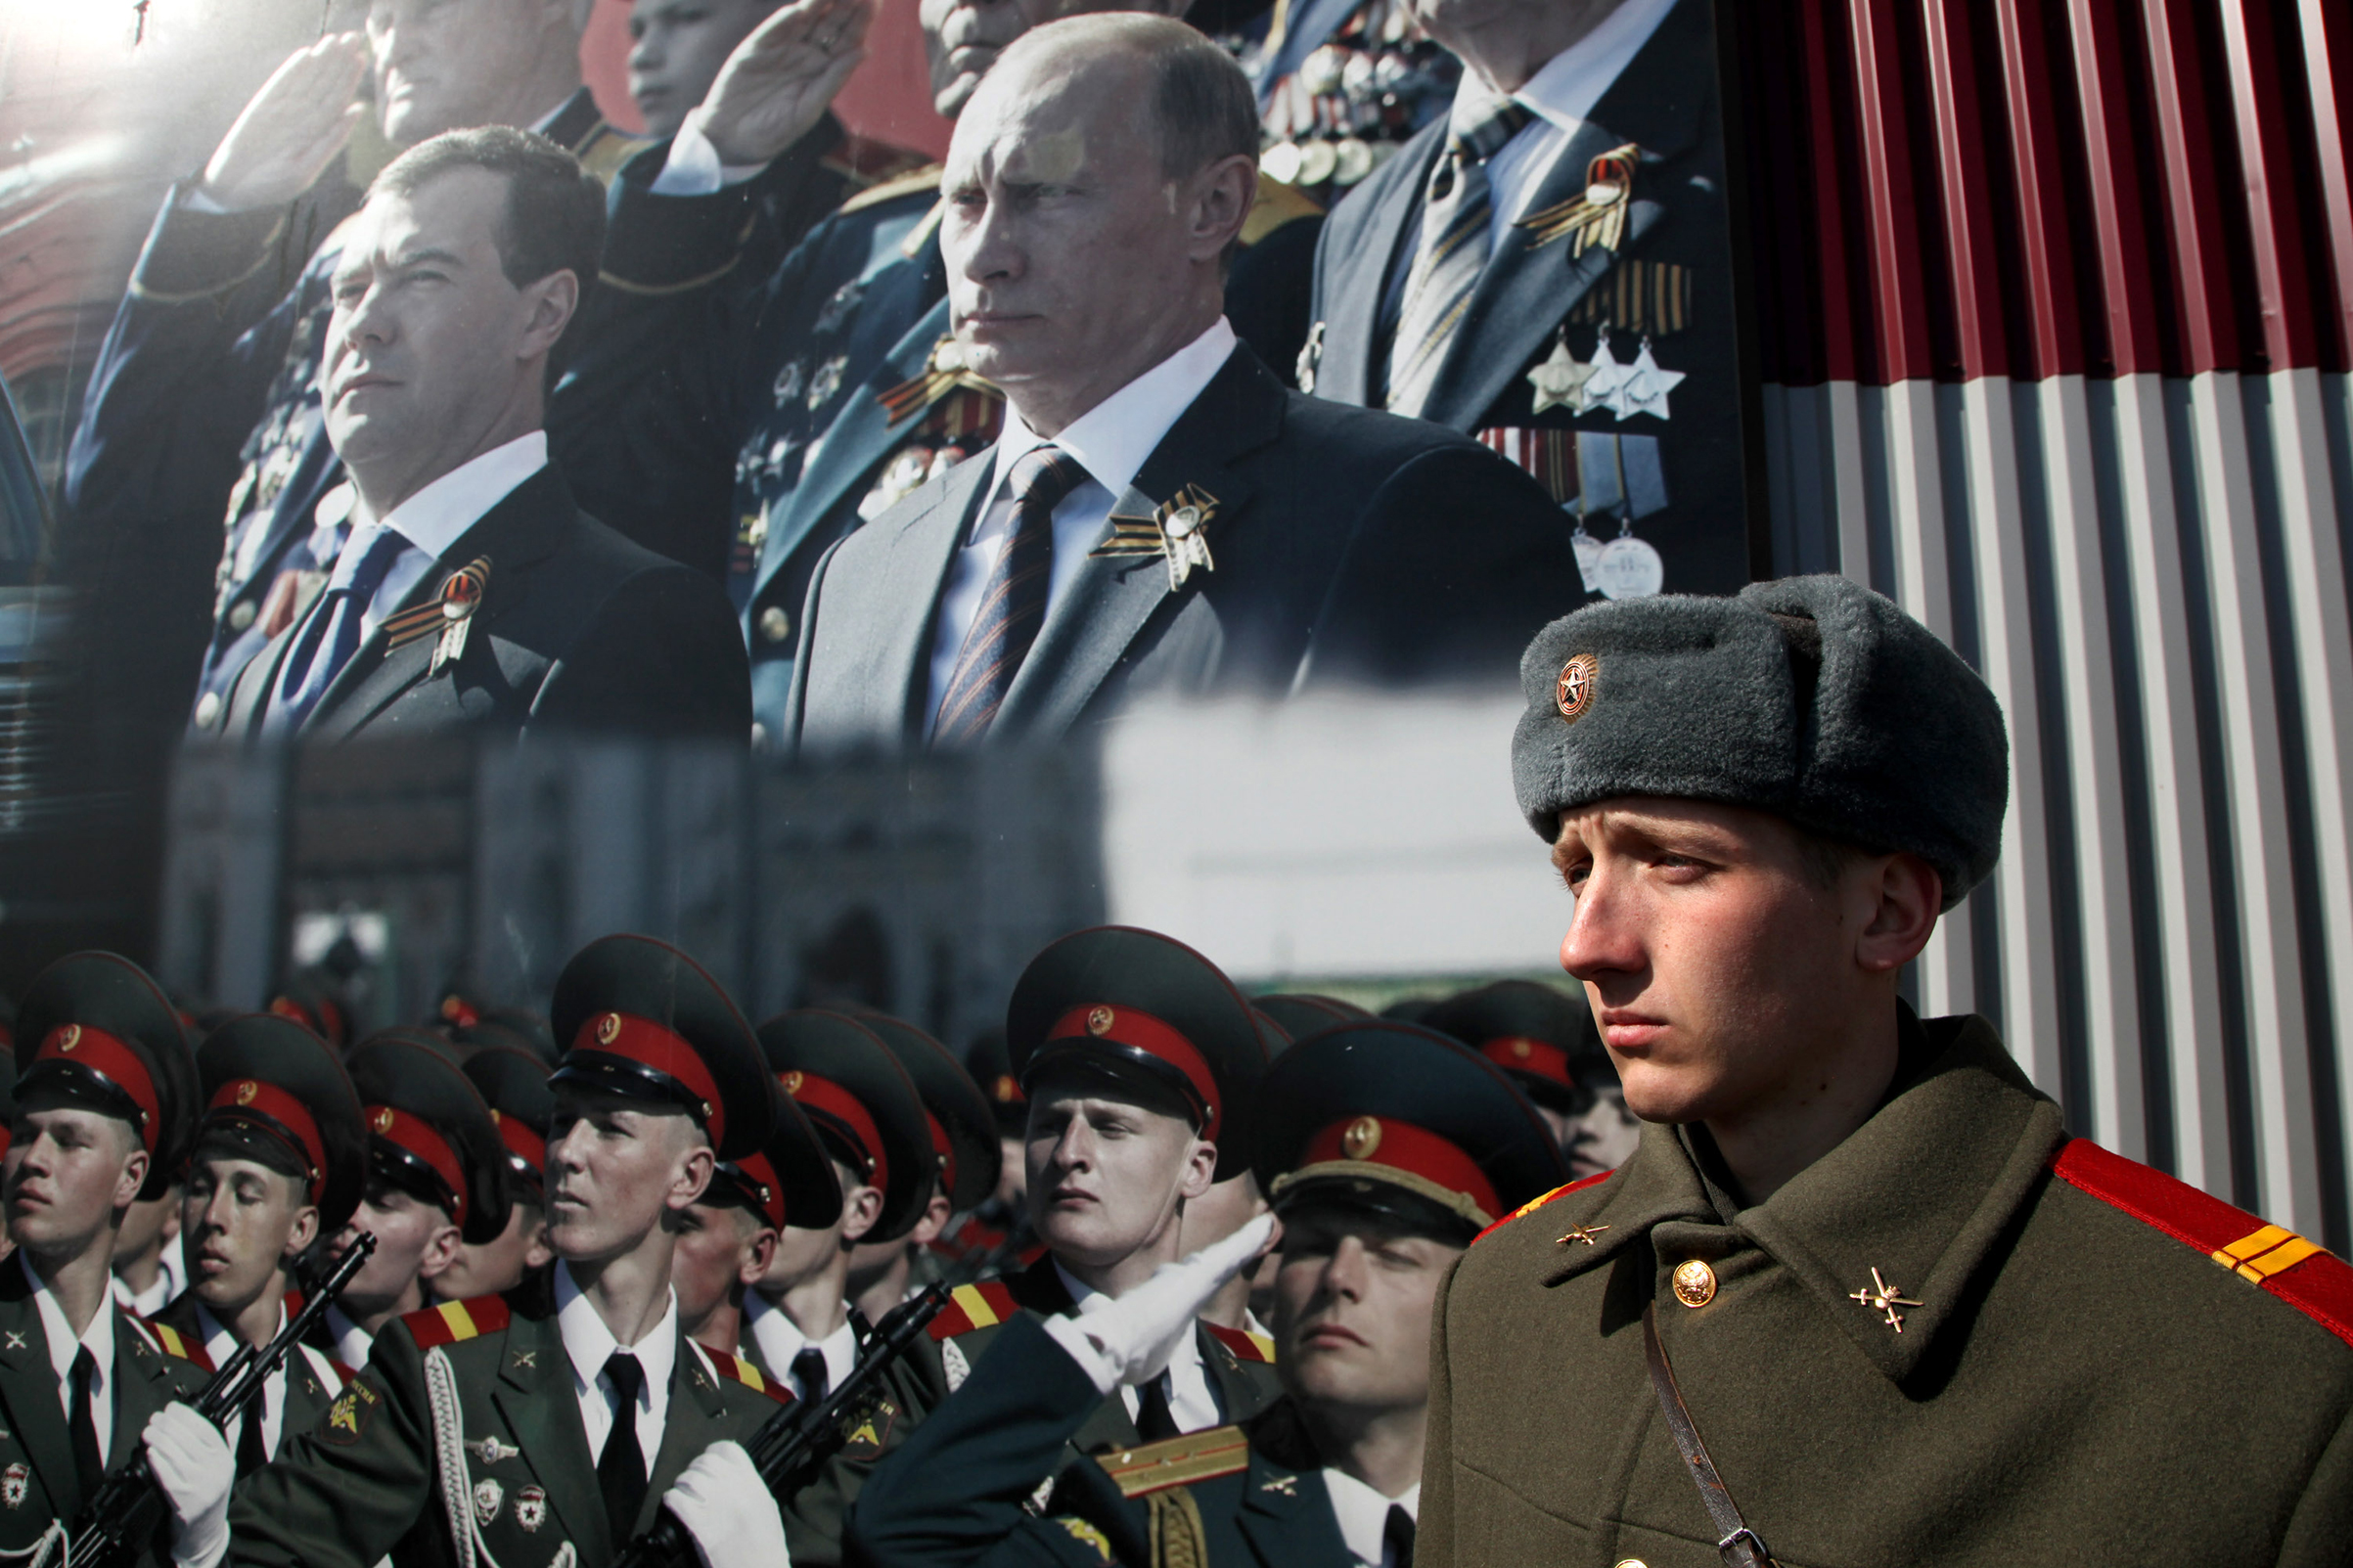 A Russian soldier stands in front of poster with portraits of Russian President-elect Vladimir Putin and outgoing President Dmitry Medvedev during a rehearsal for the Victory Day parade near Moscow on April 4, 2012. The parade is dedicated to the anniversary of the Soviet victory over Nazi Germany in World War II. (Sasha Mordovets—Getty Images)